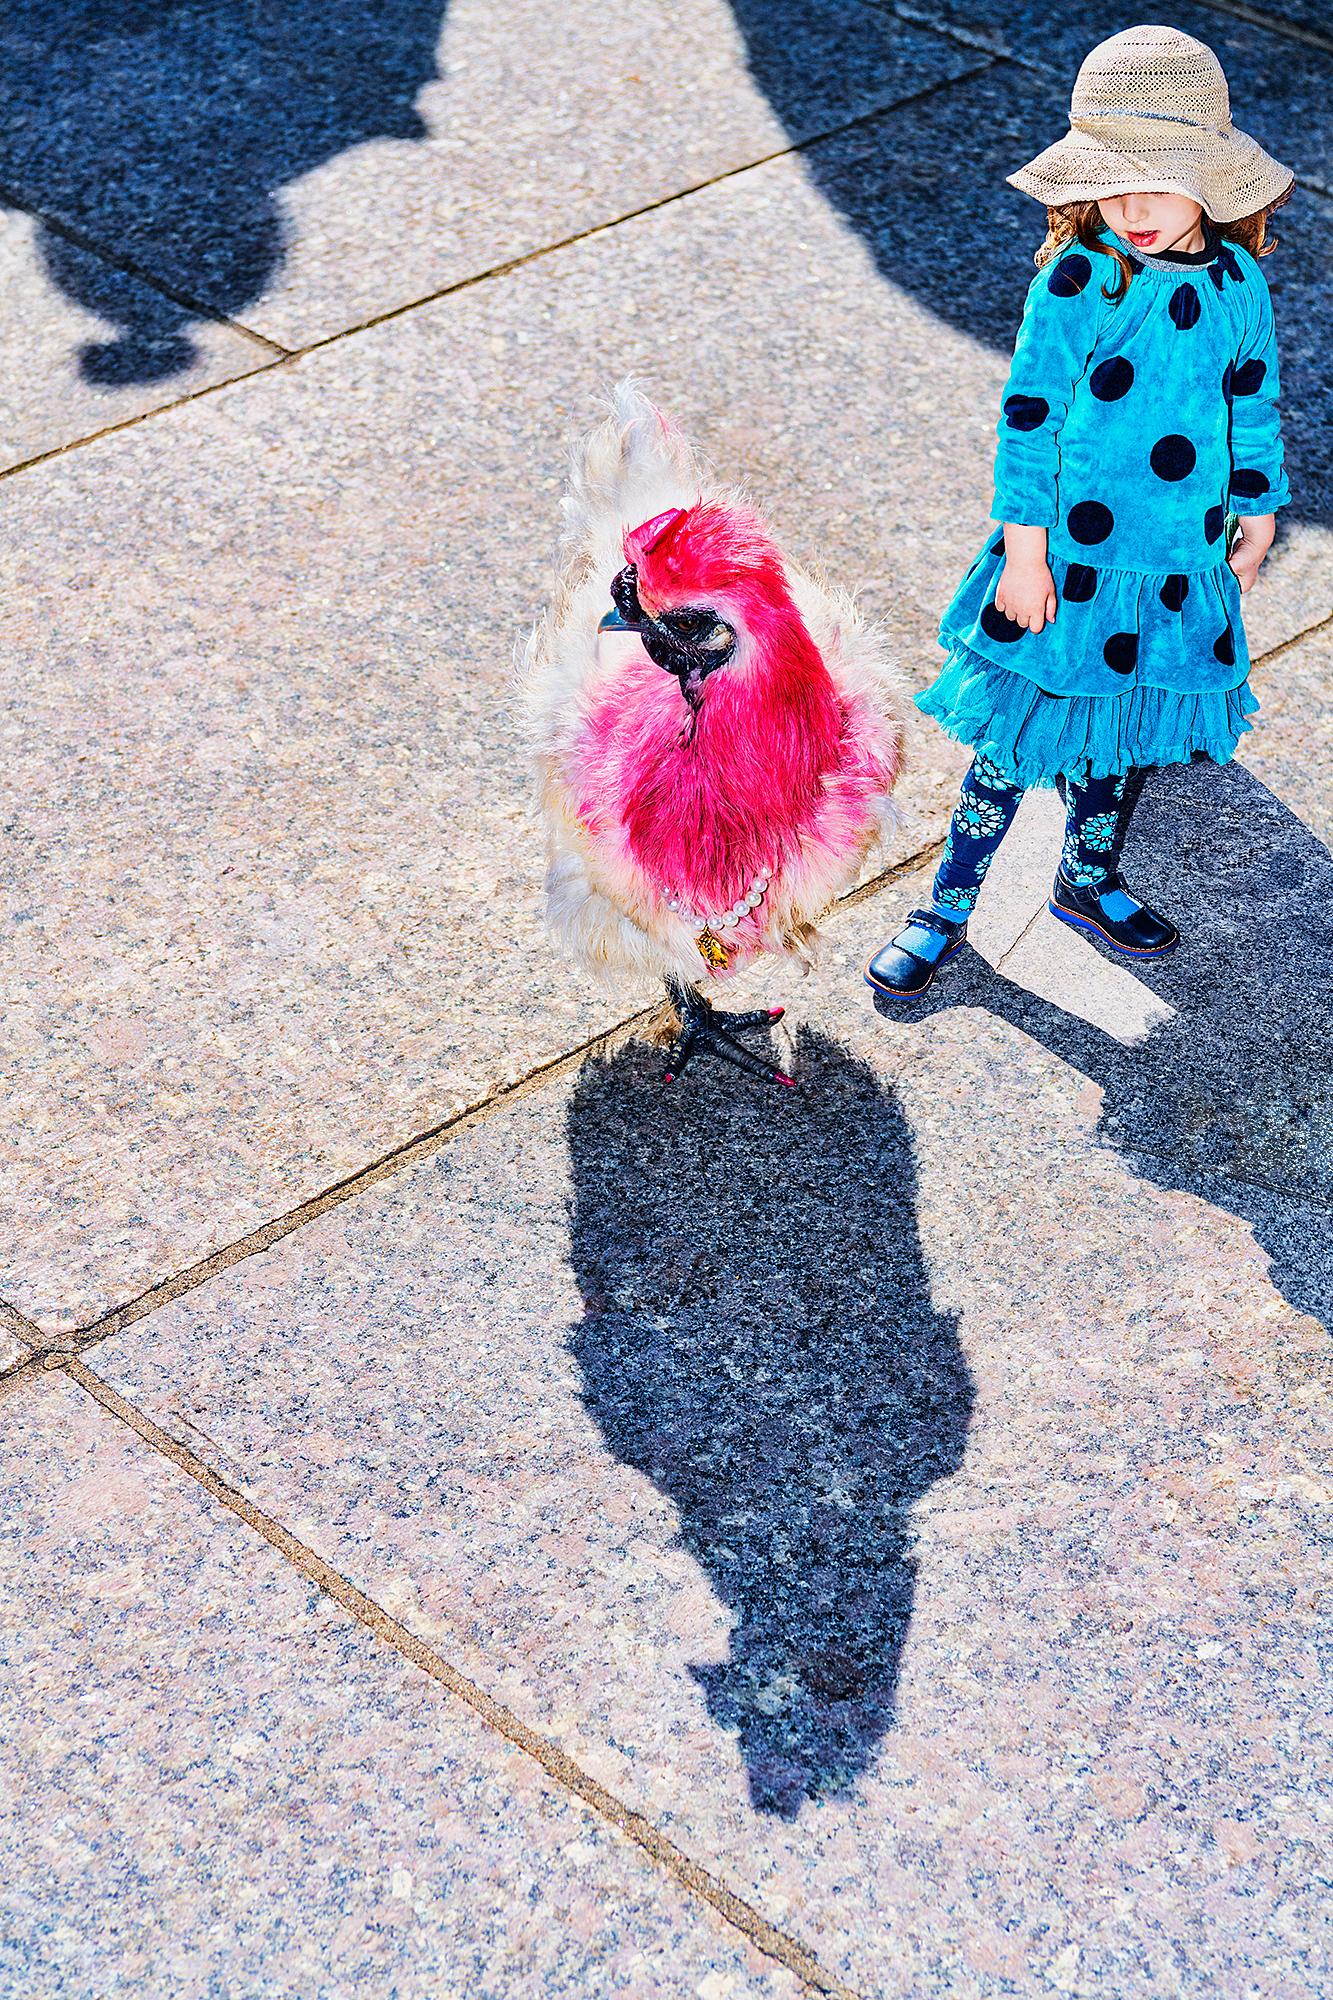 Mitchell Funk Color Photograph - Funky Red Chicken and Girl with Dreamy Blue Dress